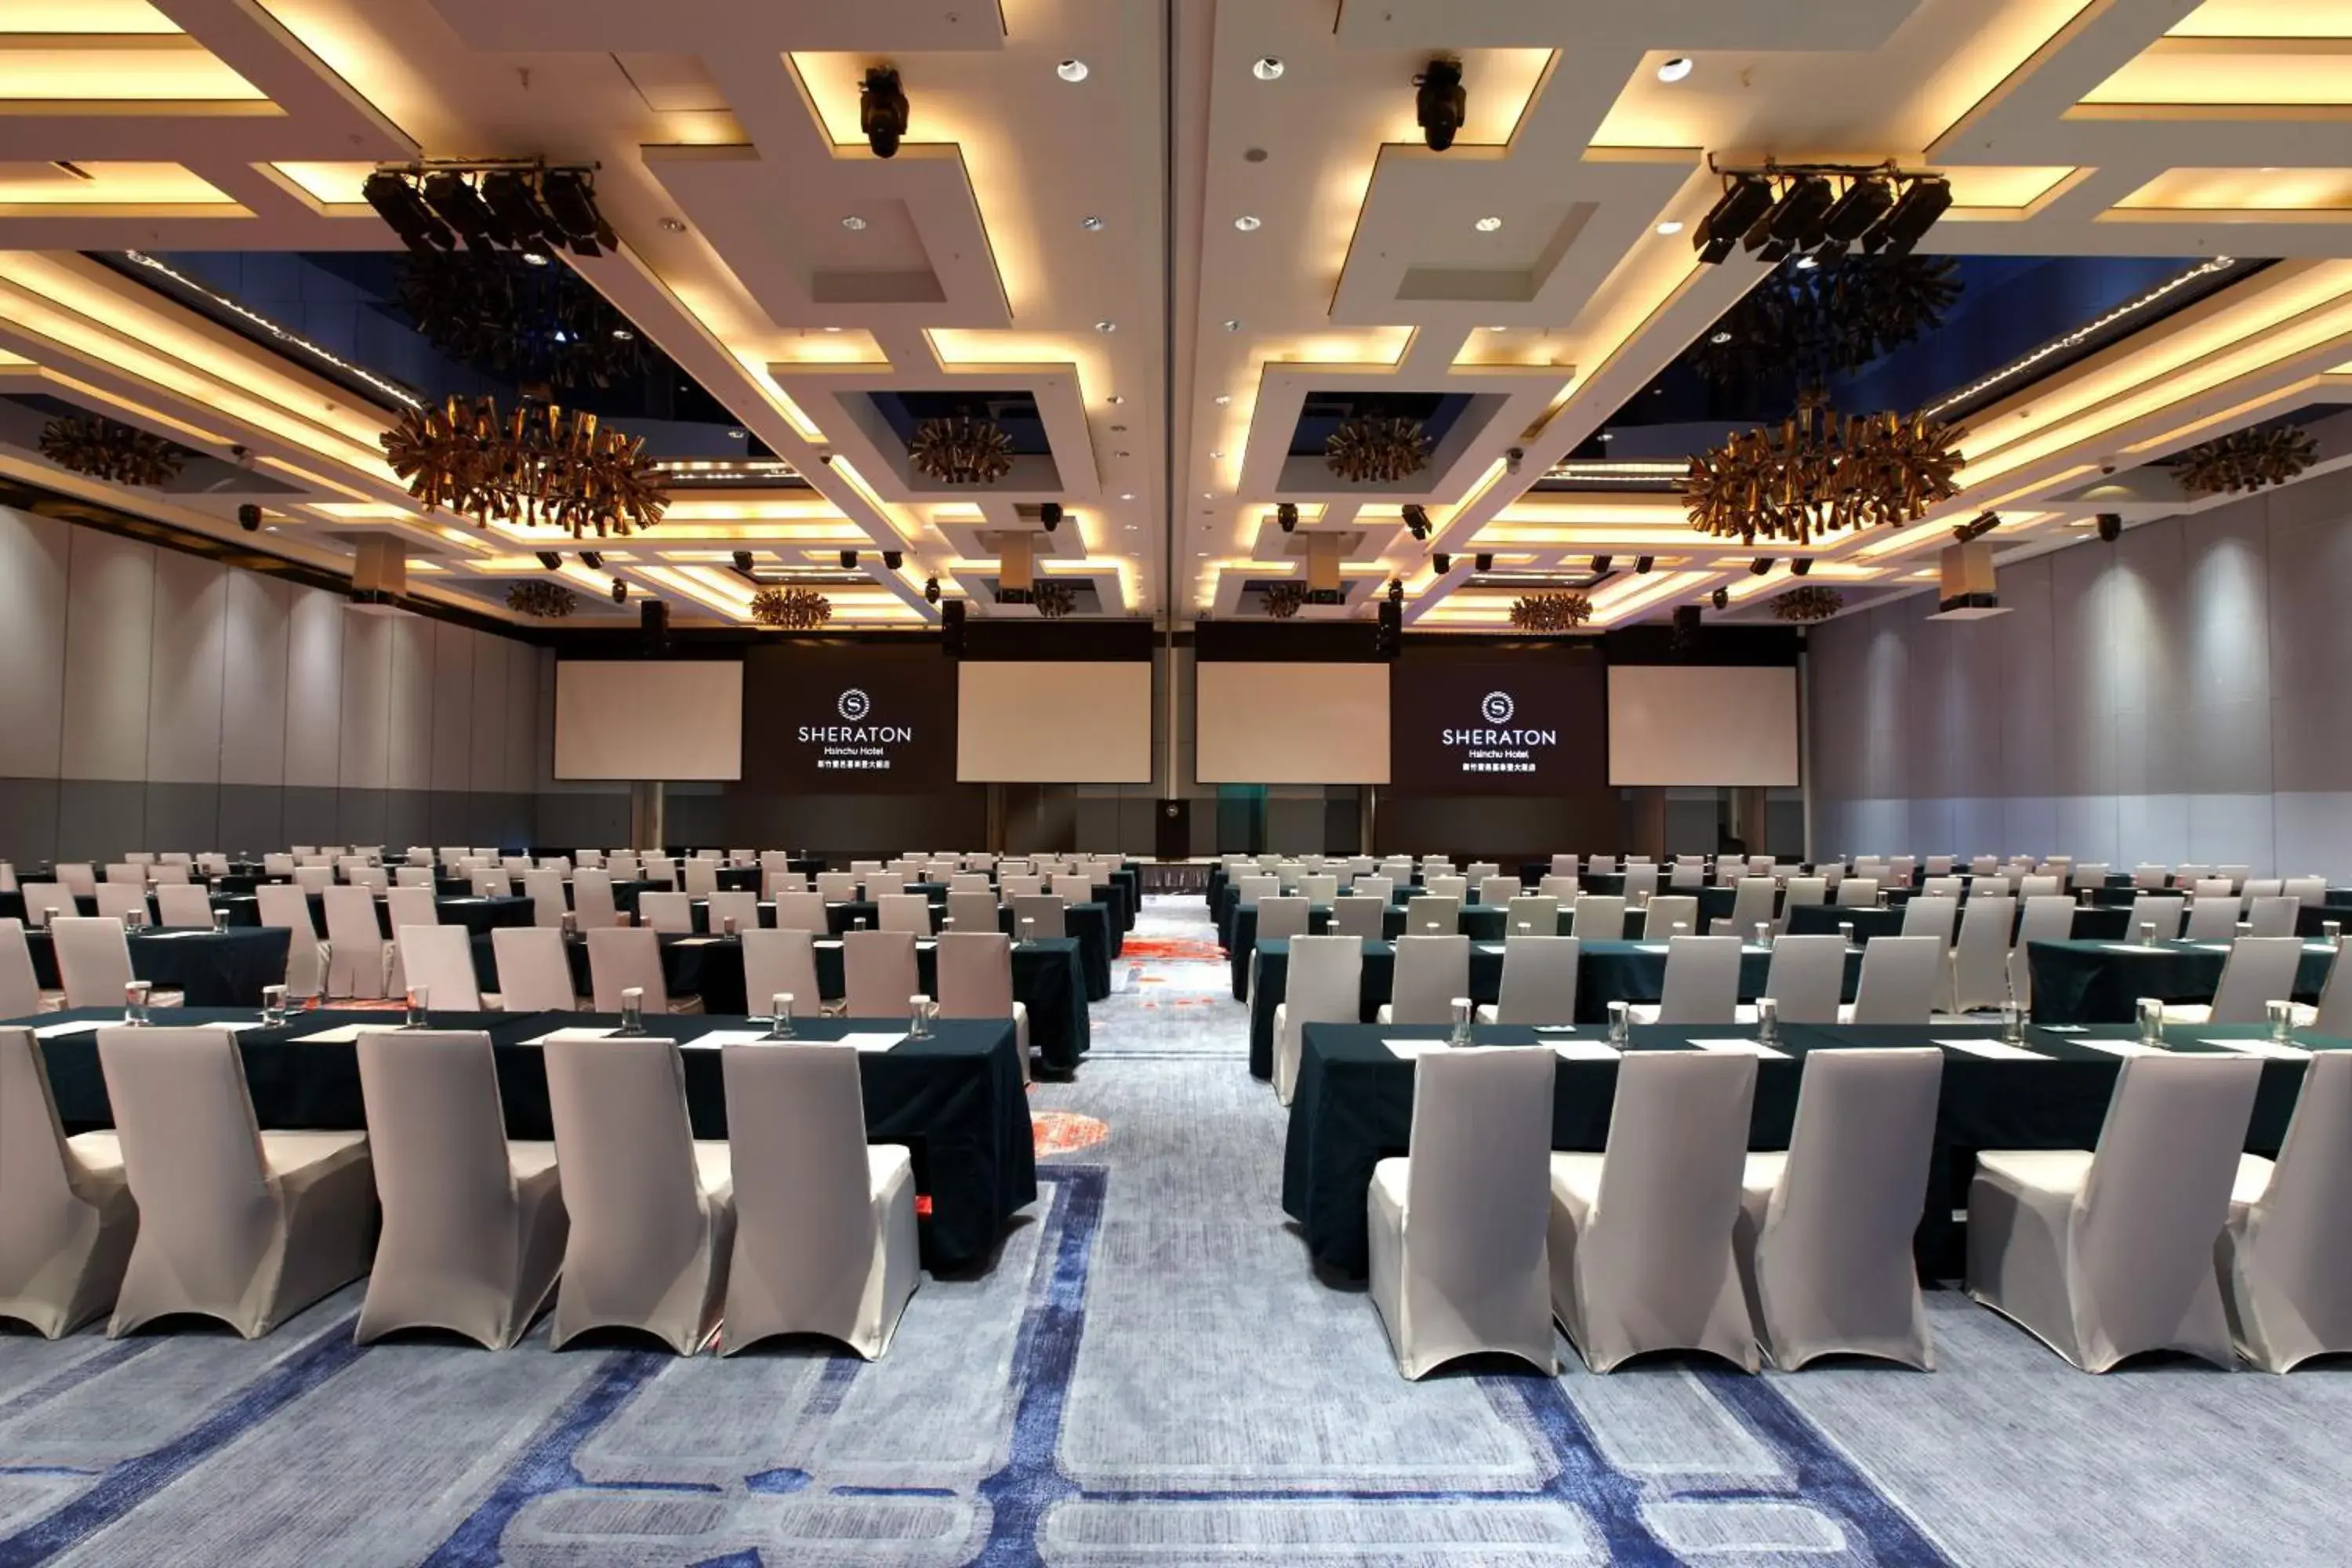 Meeting/conference room in Sheraton Hsinchu Hotel